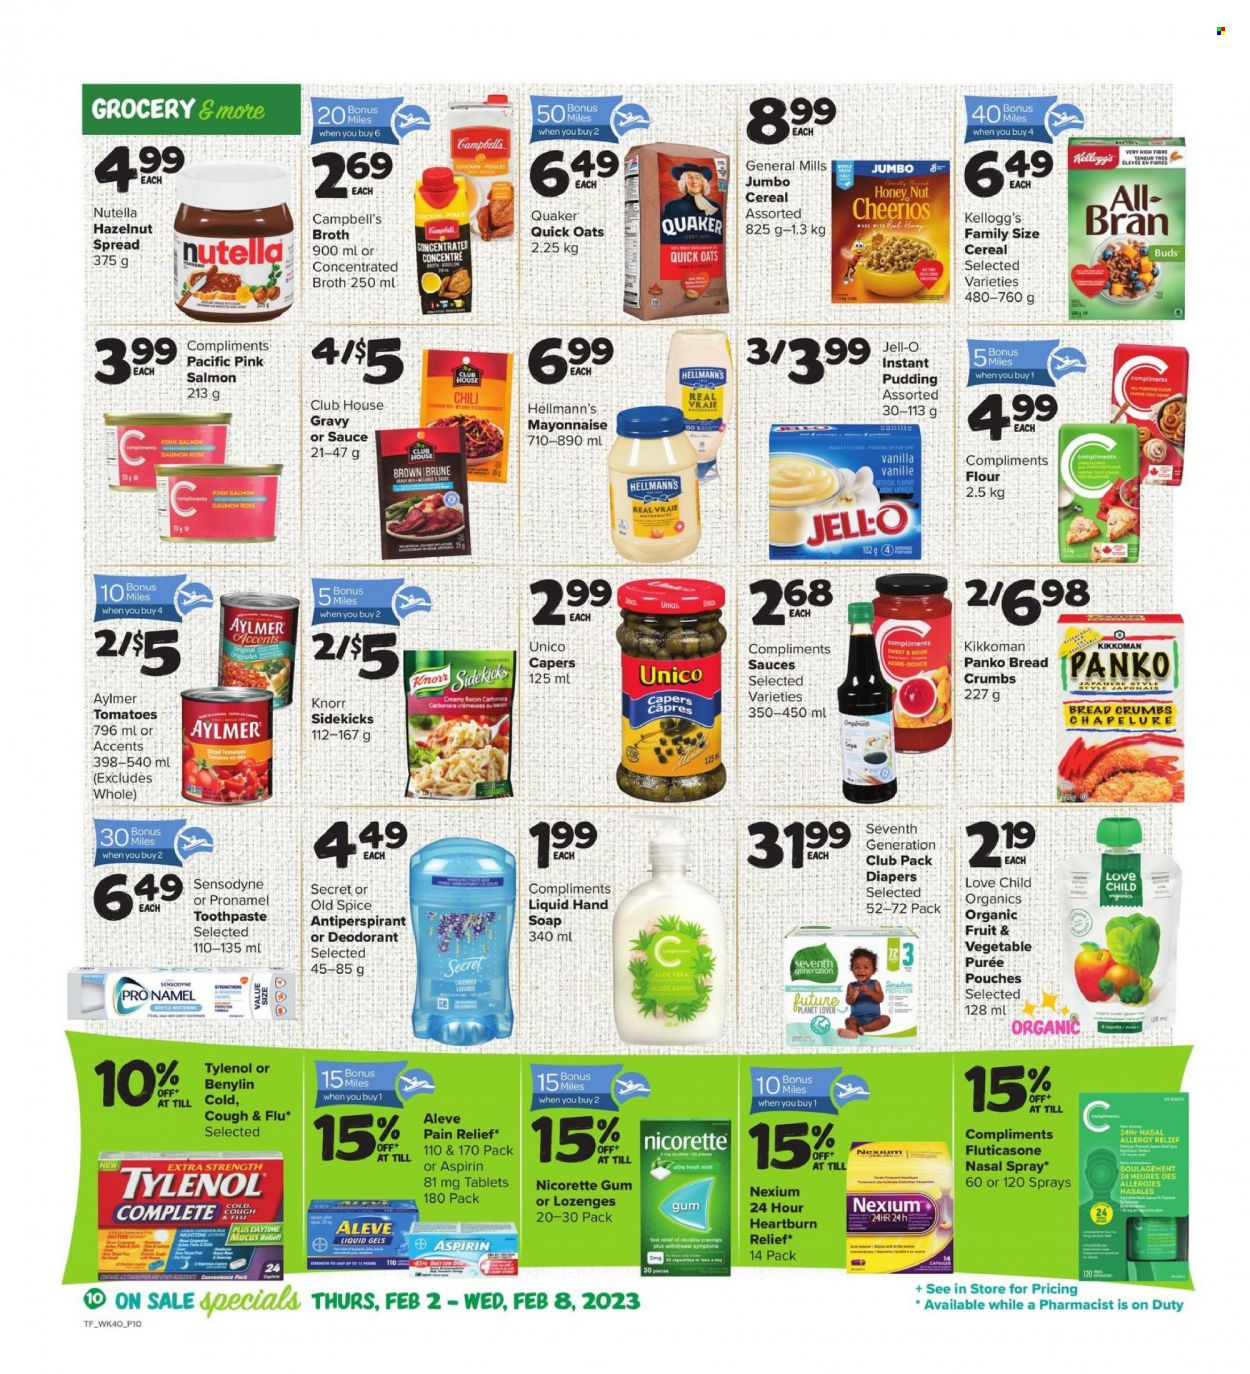 thumbnail - Thrifty Foods Flyer - February 02, 2023 - February 08, 2023 - Sales products - breadcrumbs, panko breadcrumbs, salmon, Campbell's, Quaker, pudding, mayonnaise, Hellmann’s, Kellogg's, flour, oats, Jell-O, broth, capers, cereals, Cheerios, Quick Oats, All-Bran, spice, Kikkoman, baby food pouch, nappies, hand soap, soap, toothpaste, anti-perspirant, pain relief, Aleve, Nicorette, Tylenol, Nexium, Nicorette Gum, aspirin, Benylin, nasal spray, allergy relief, Nutella, Old Spice, Sensodyne, Knorr, deodorant. Page 10.